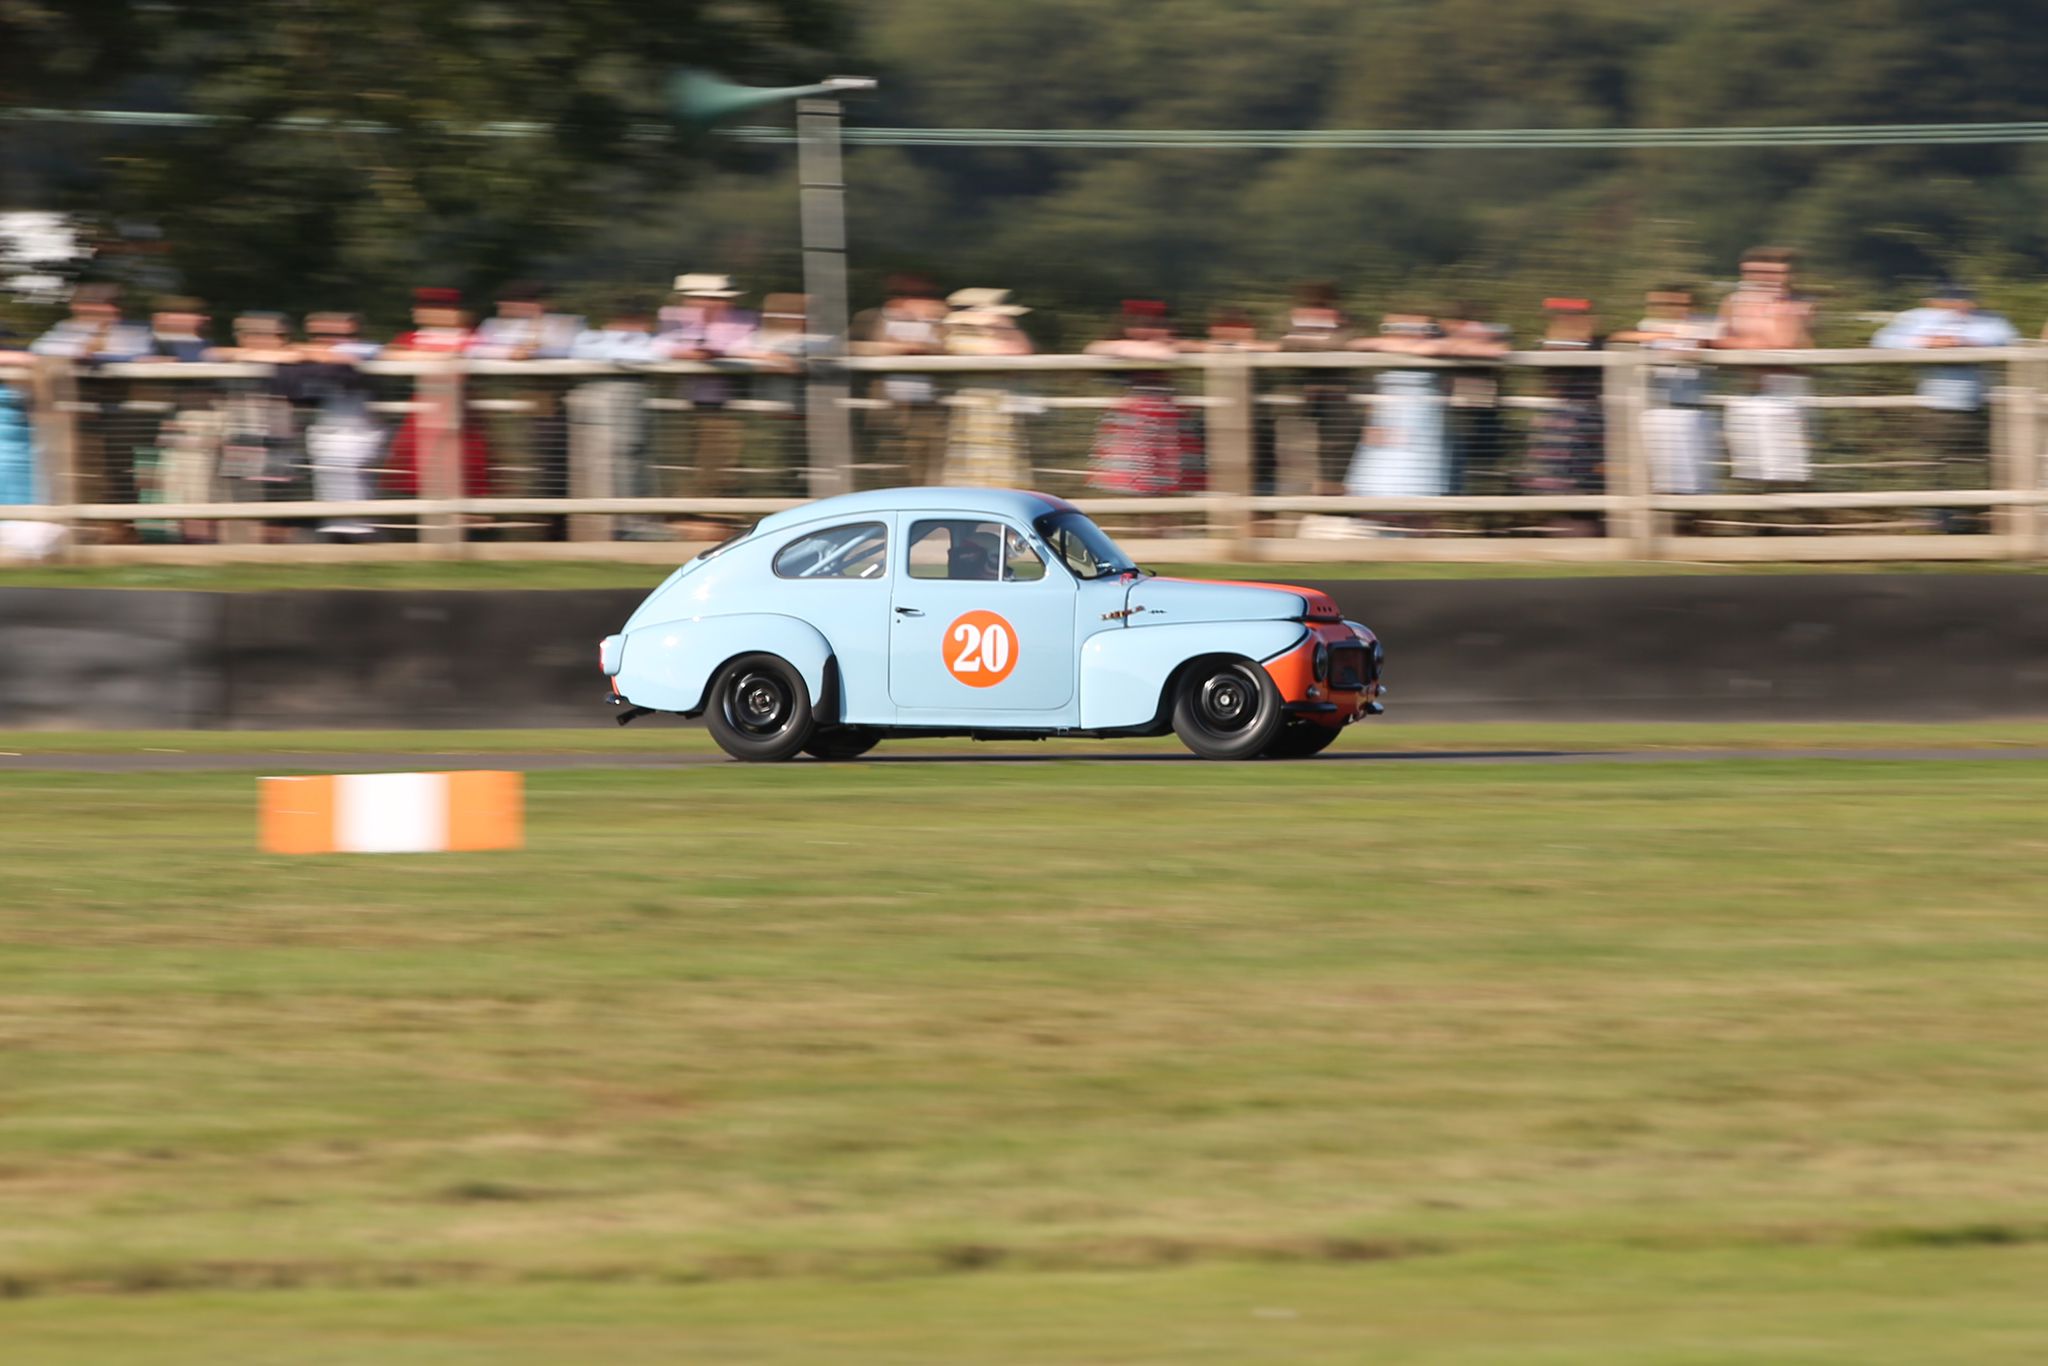 A Volvo PV544 flying around the track